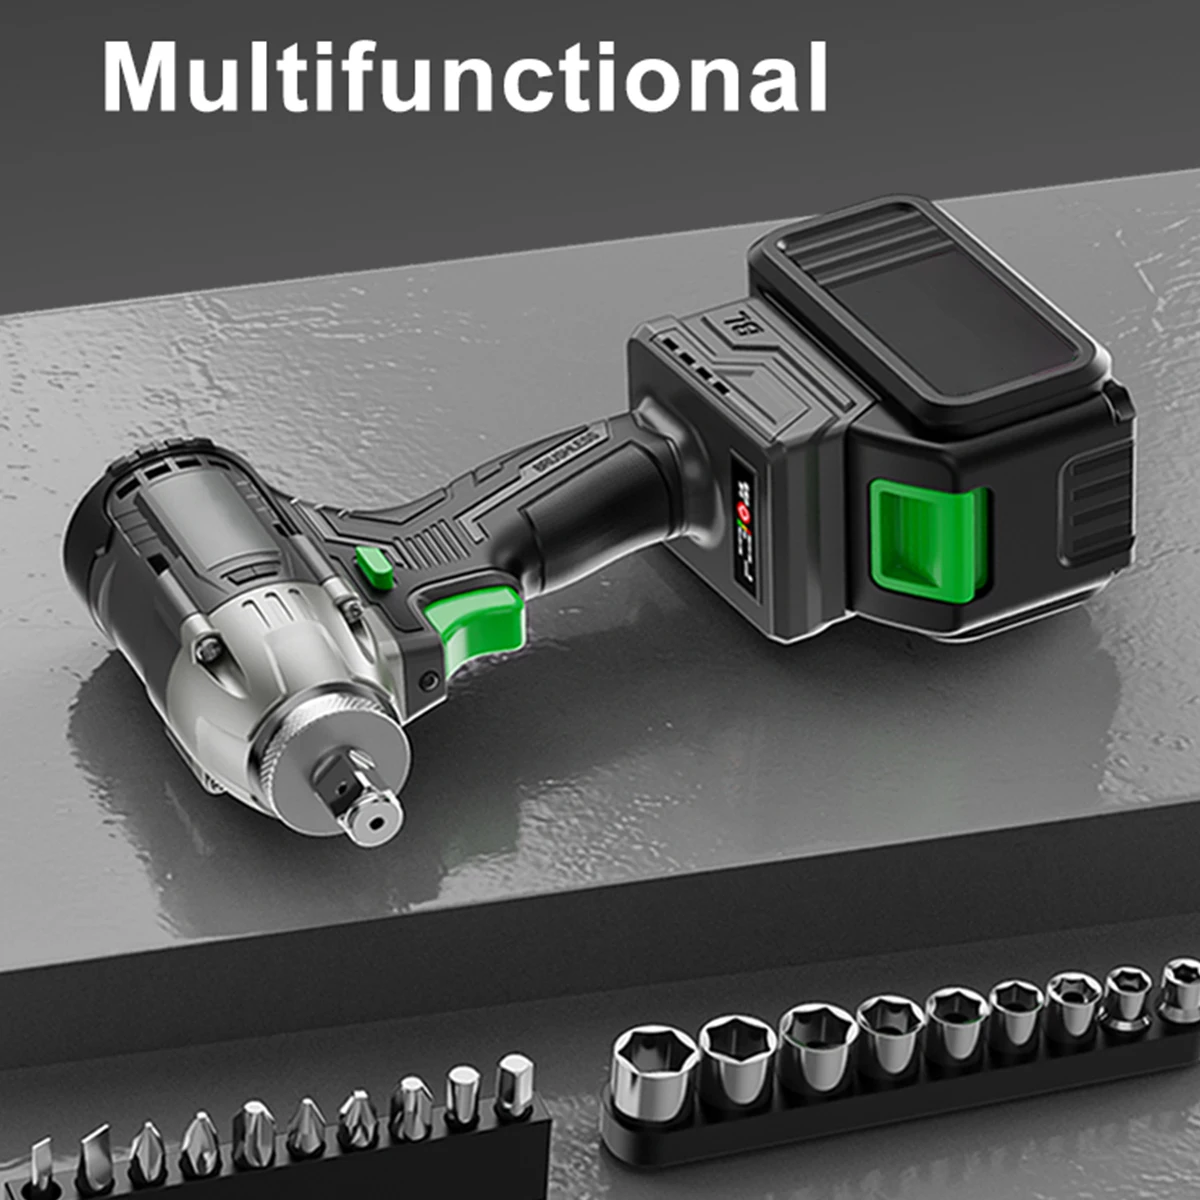 Wusen scaffolding box double ring spanner tool socket set combination impact wrench 1000 nm adjustable electric wheel spanner